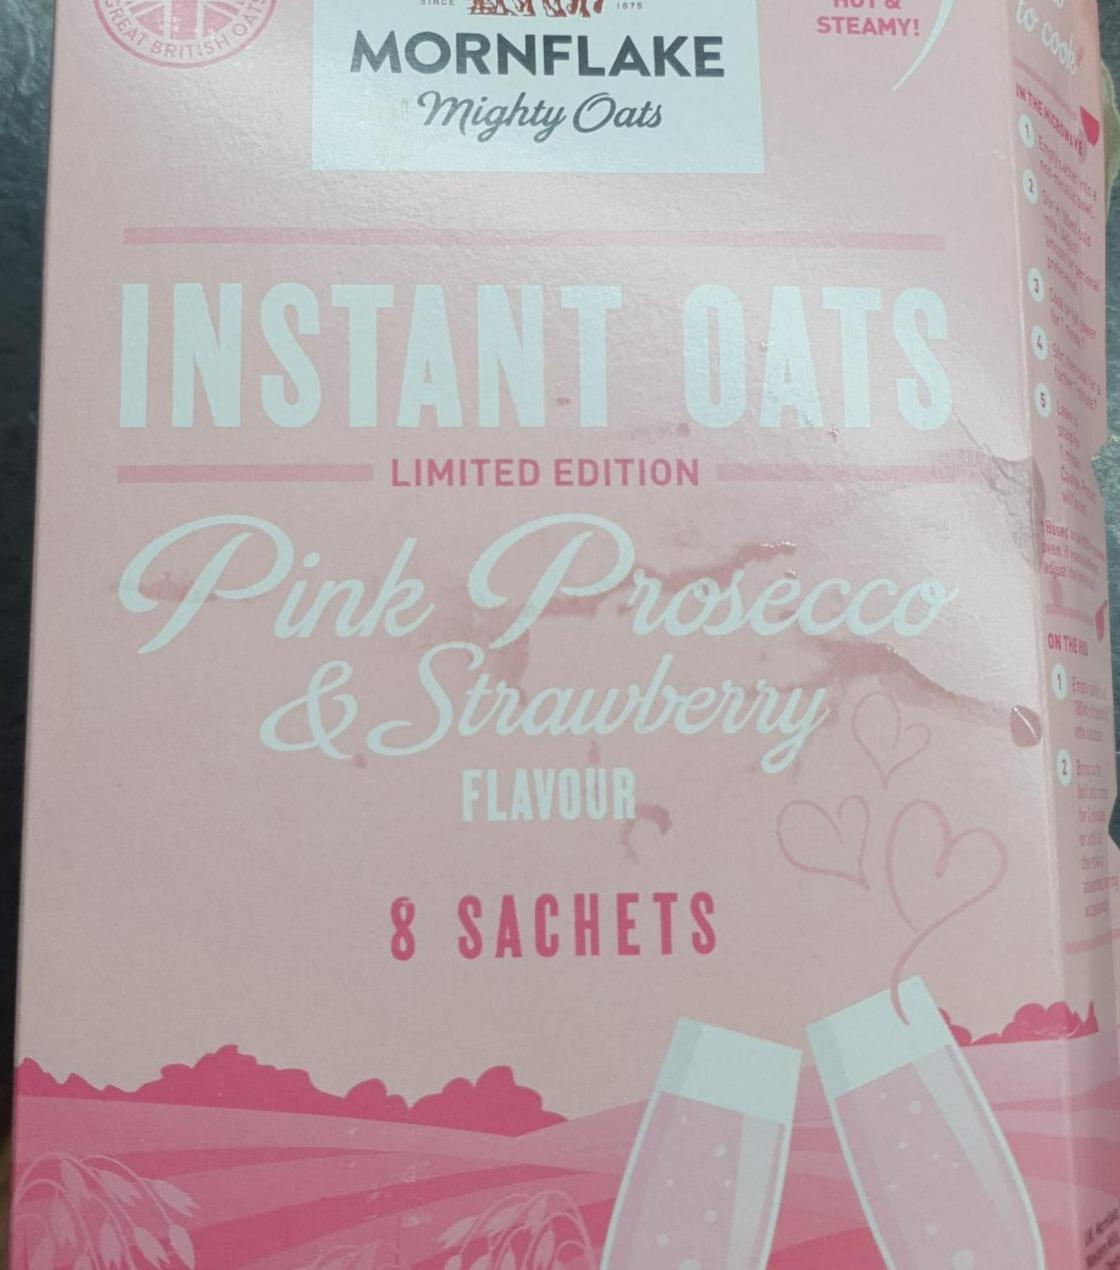 Fotografie - Instant oats Pink prosecco & strawberry flavour Mornflake